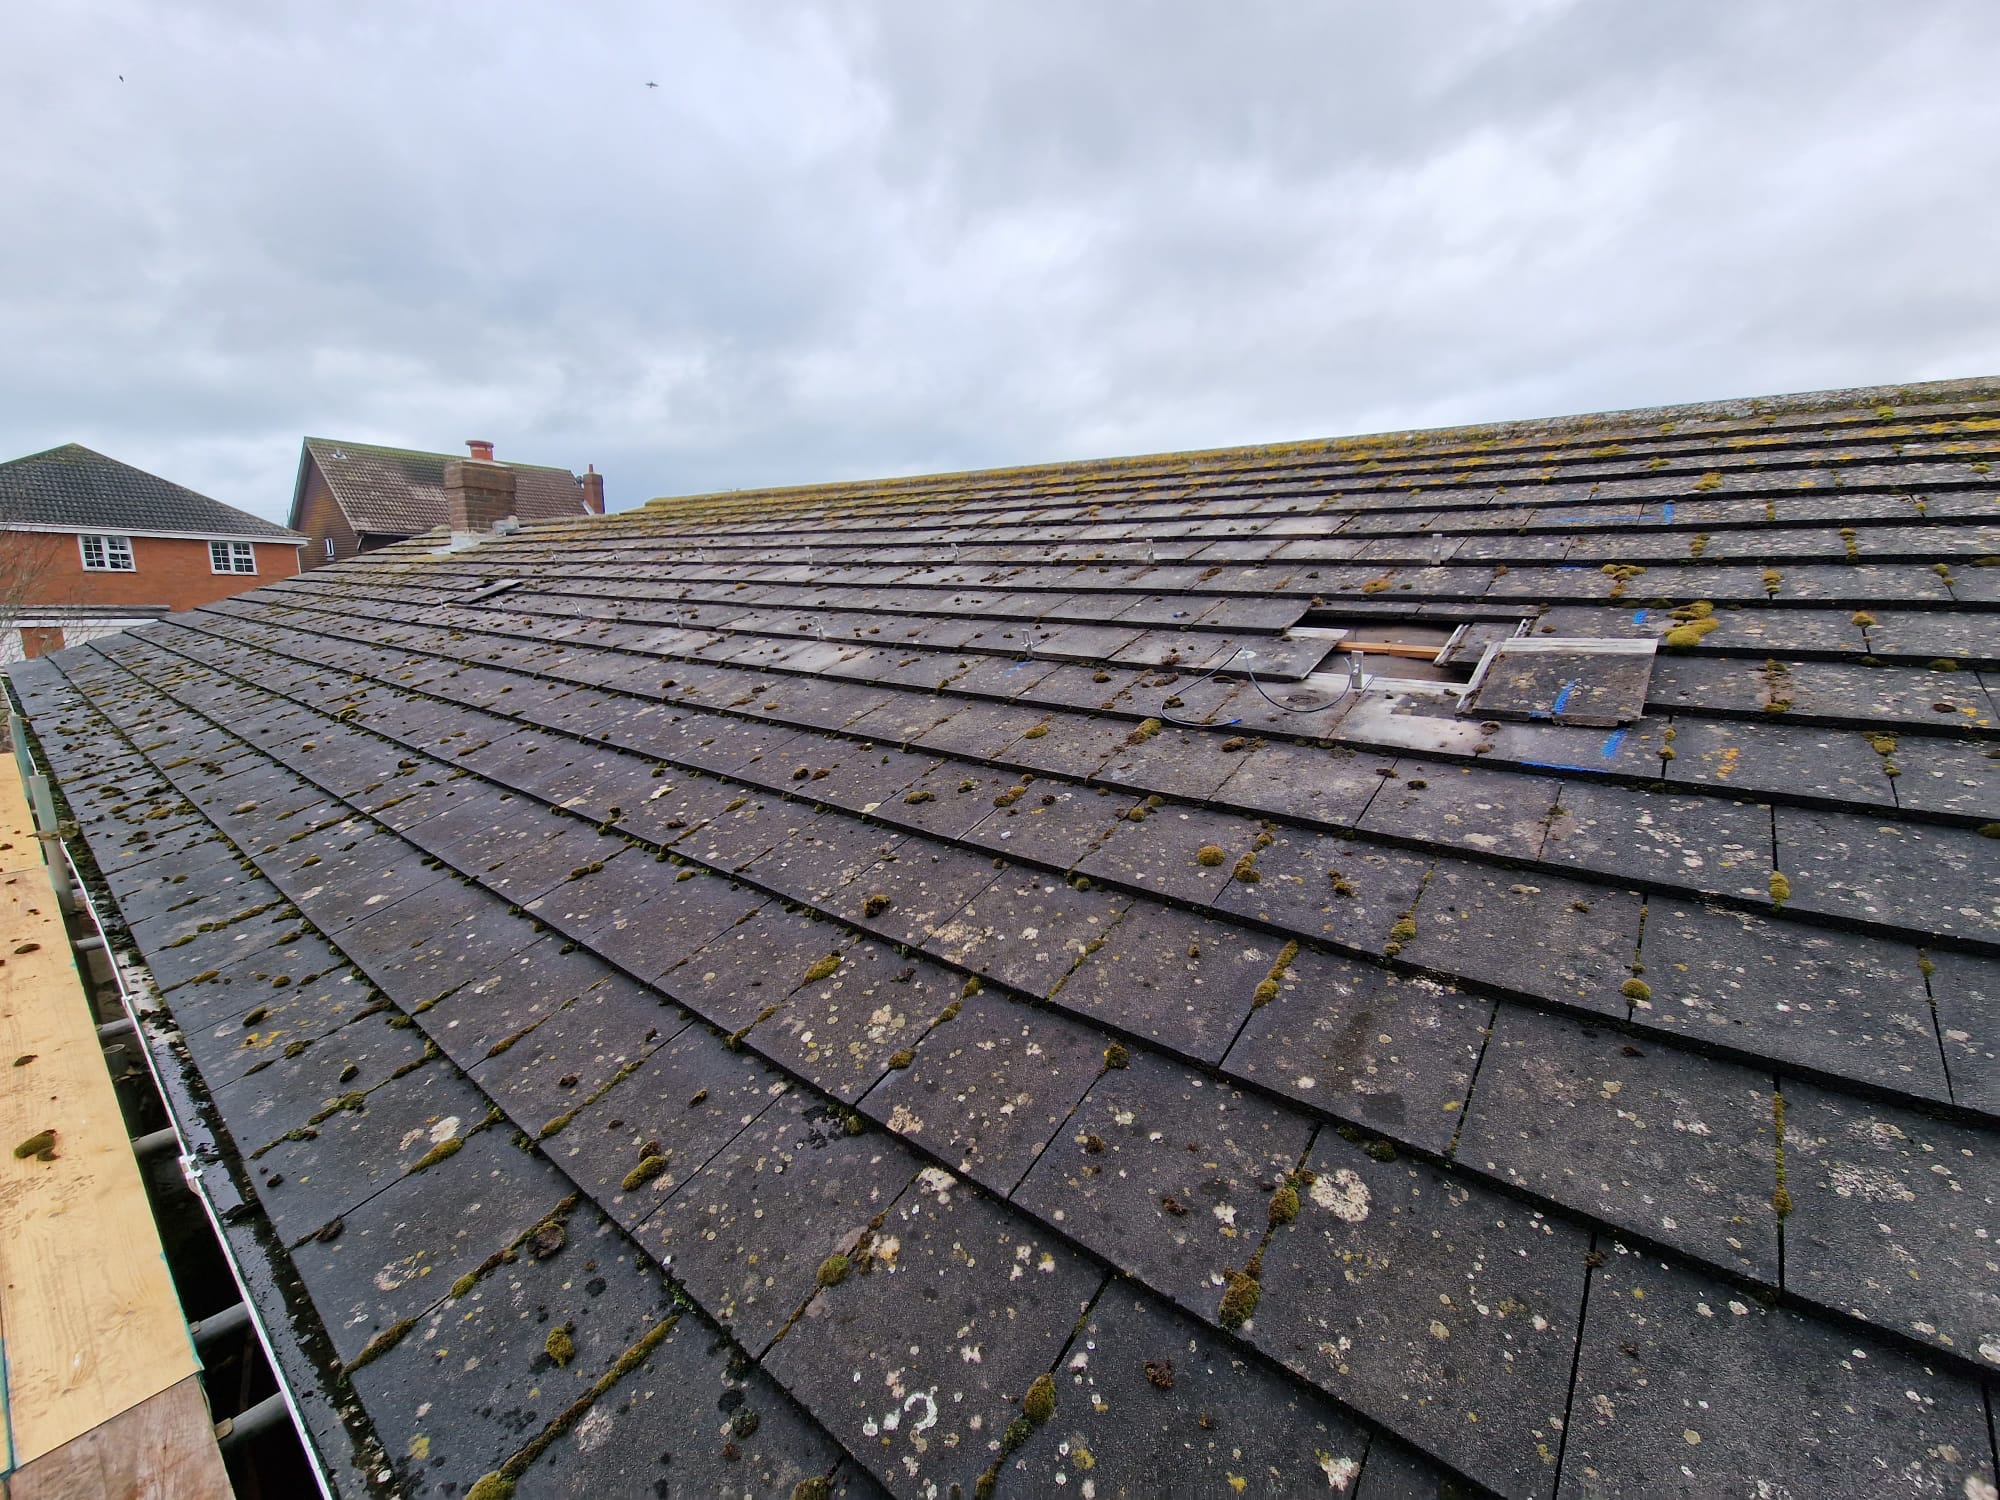 Roof being prepared for solar fixings